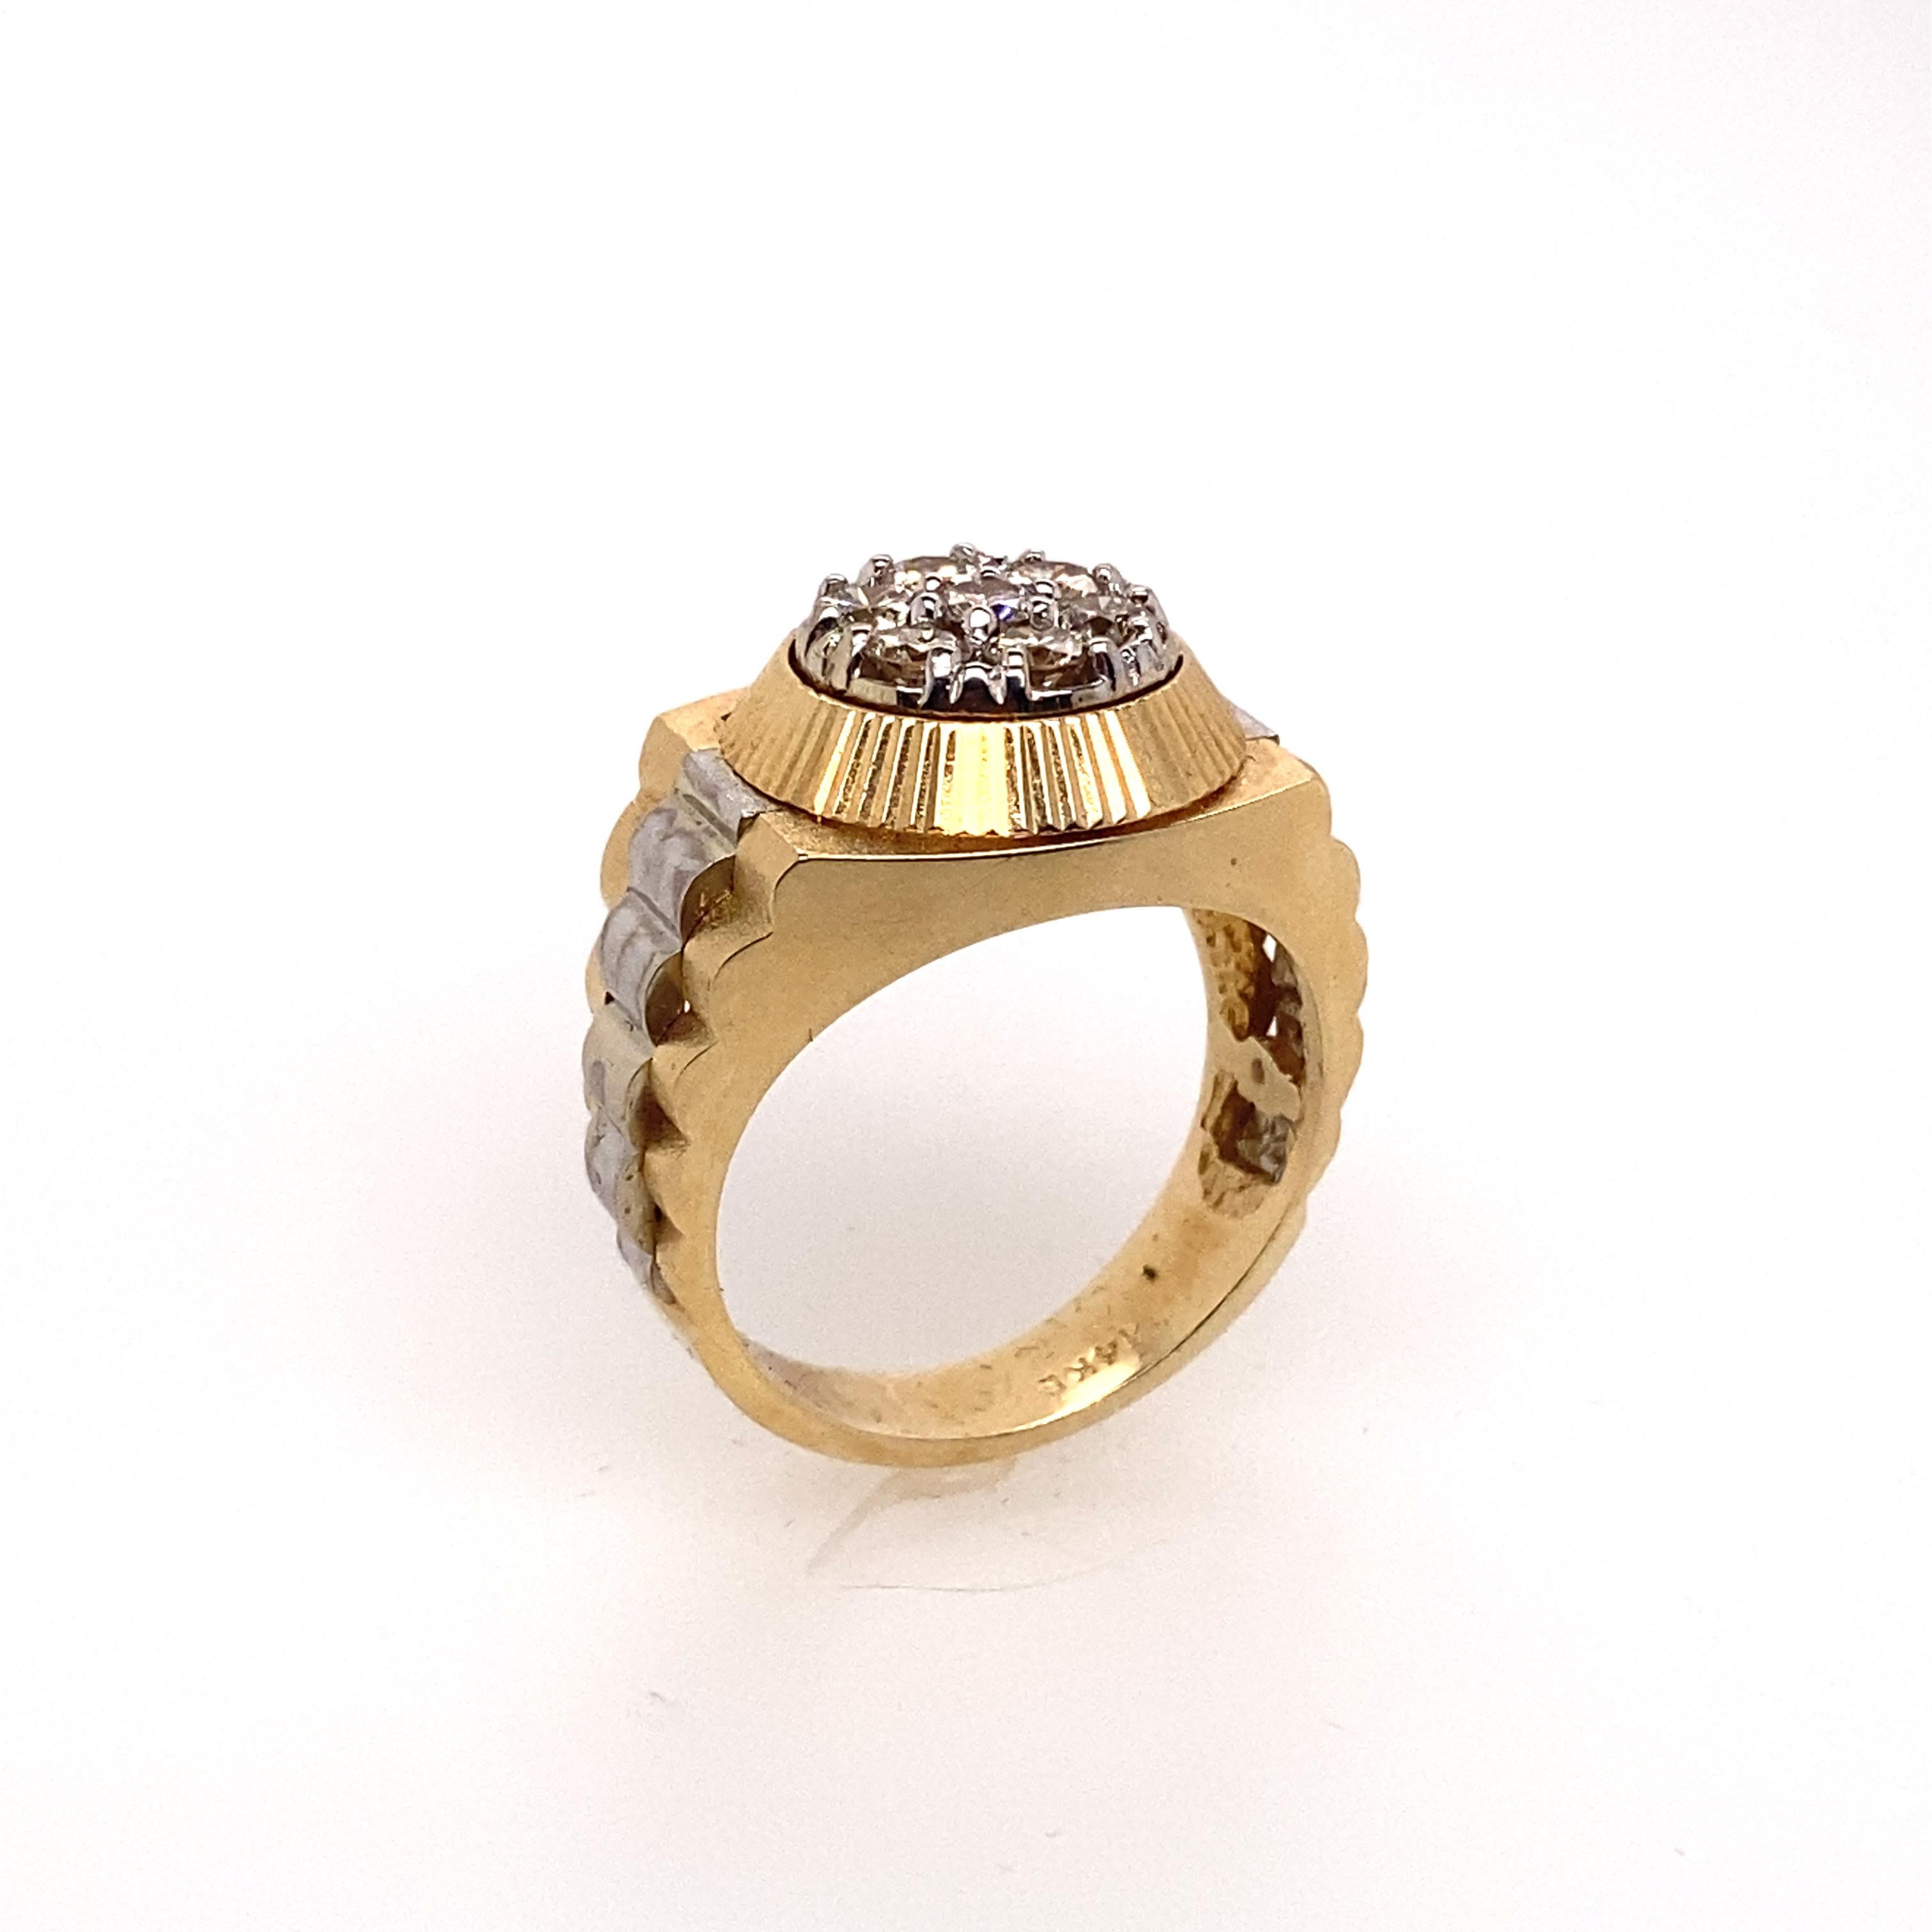 This stunning unisex signet ring is crafted in 14 karat yellow and white gold. The center is set with 7 brilliant round diamonds in that square modified halo style signet ring.

Diamonds Weight: 1.00 carat
Diamonds Shape : Brilliant Round
Diamonds